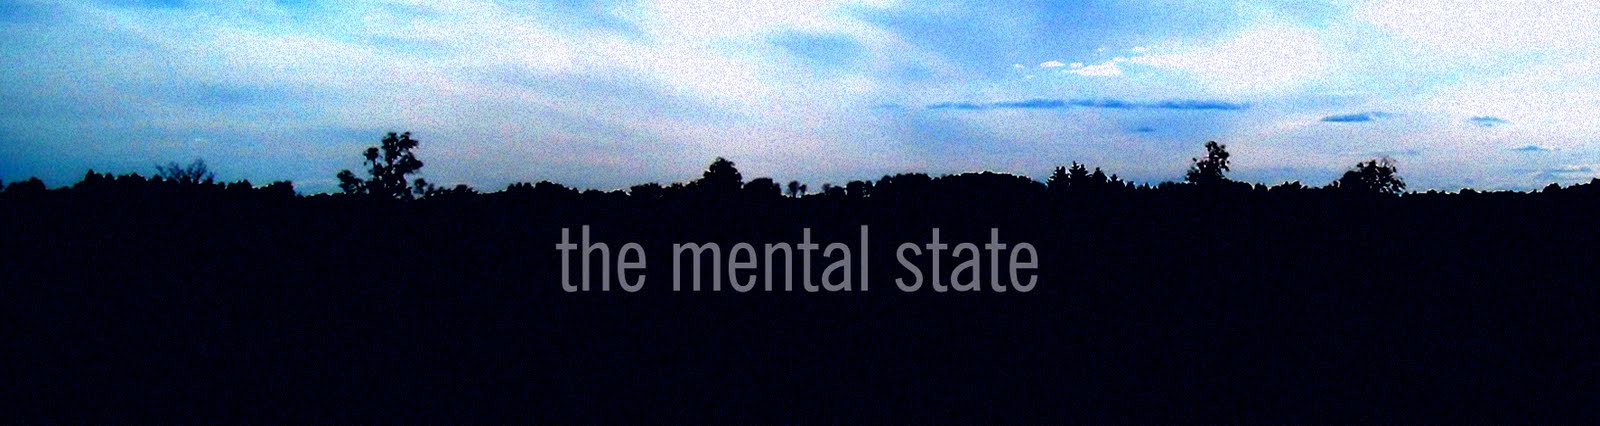 The Mental State